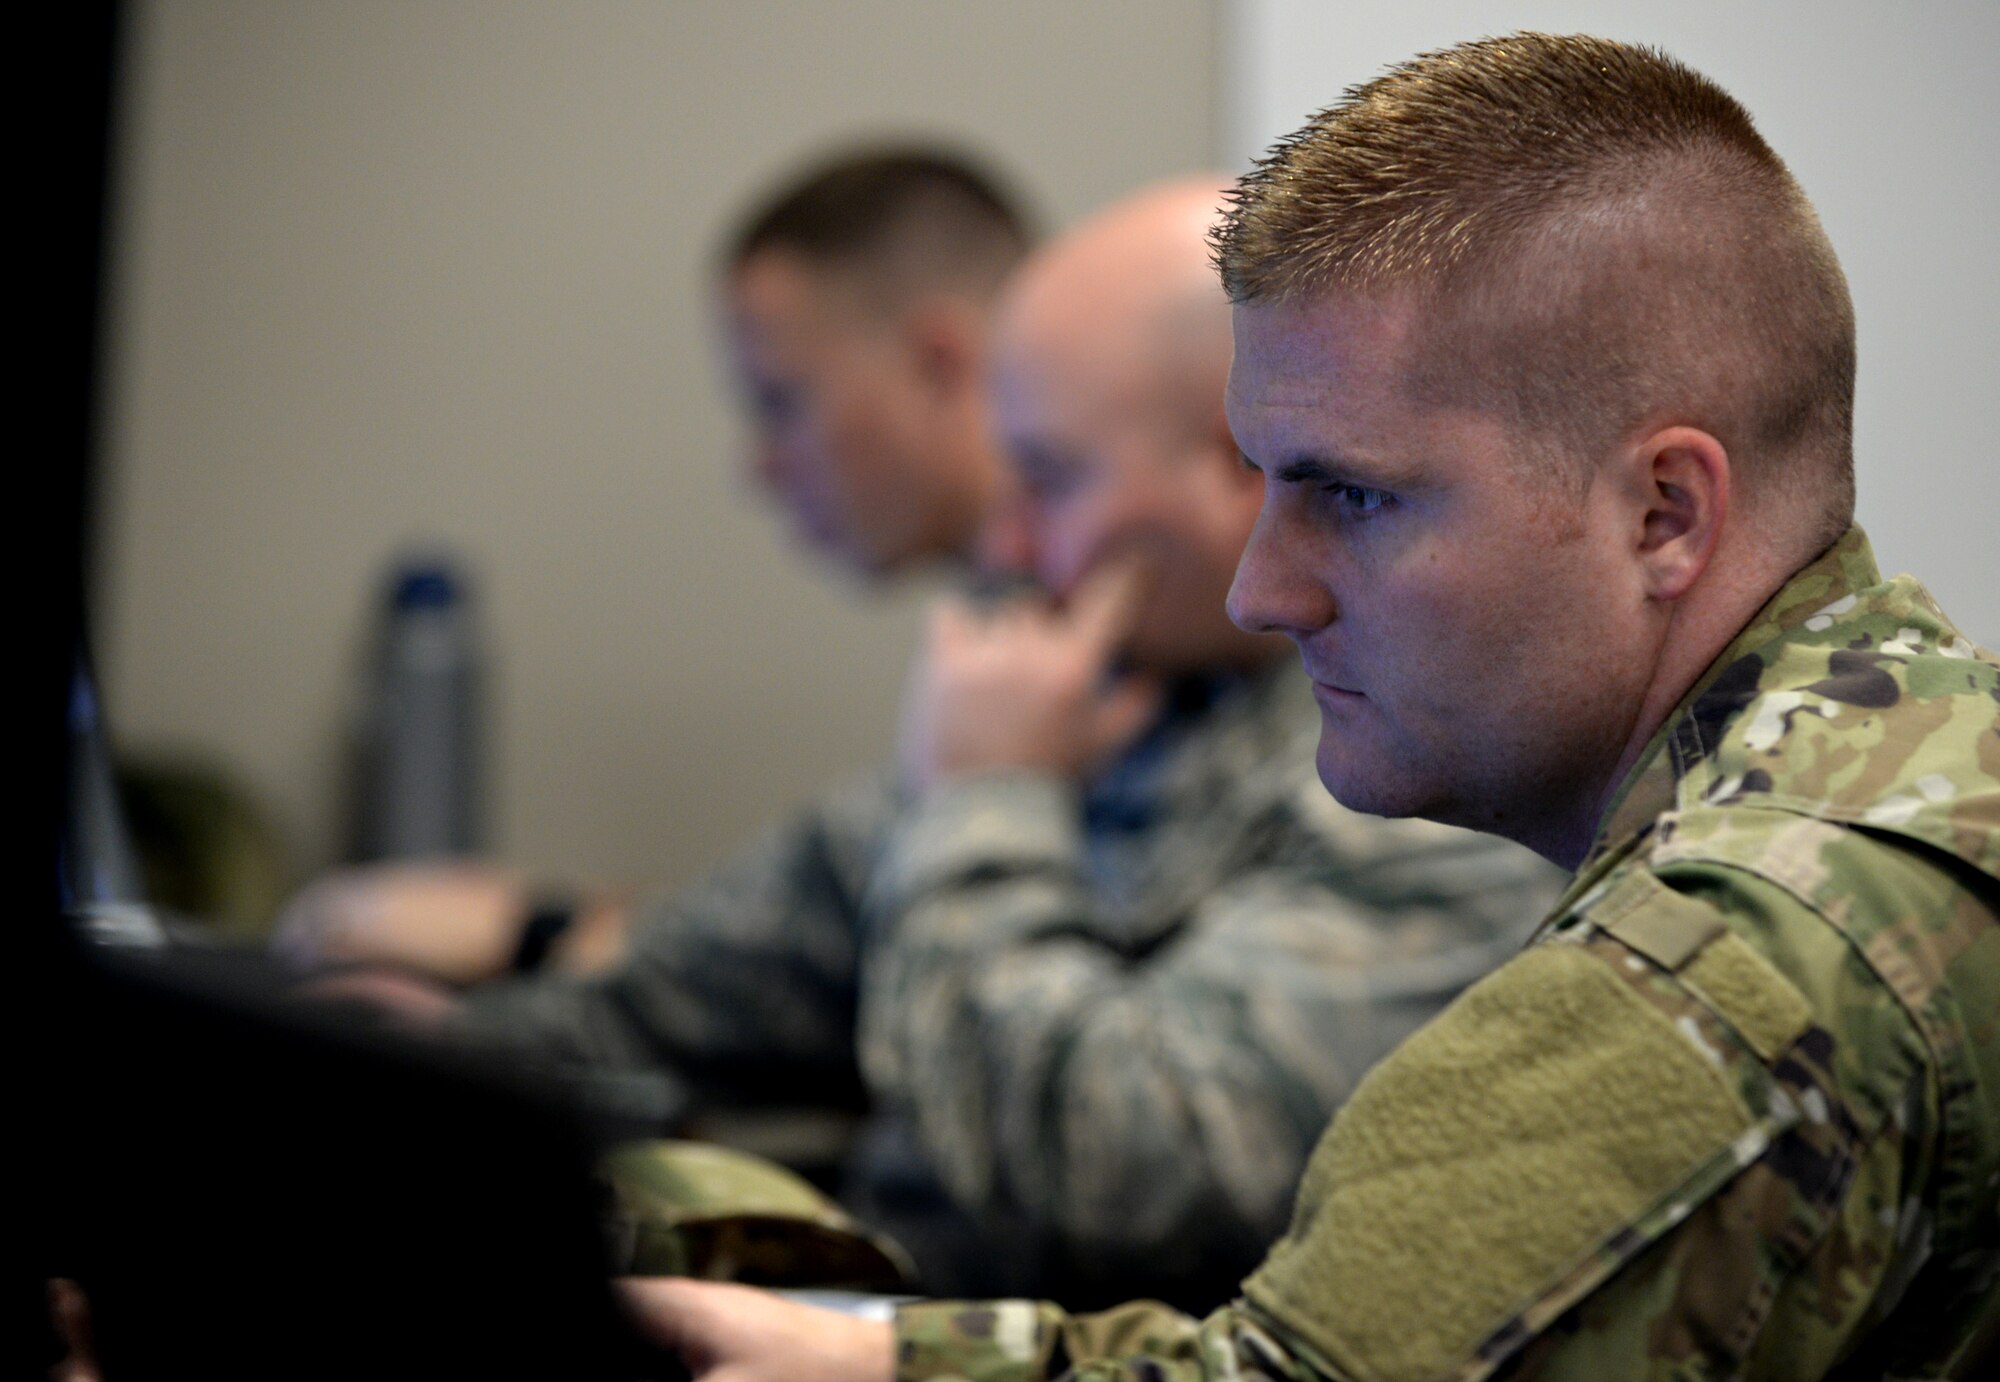 Members of the 90th Cyberspace Operations Squadron participate in the monthly 567th Cyberspace Operations Group “hunt exercise” at Joint Base San Antonio-Lackland, Texas, March 21, 2019. The three-day exercise afforded teams from the 90th, 92nd, 833rd and 834th COSs, as well as the Air Force Office of Special Investigations, the opportunity to defend against an enemy within a virtual training network. (U.S. Air Force photo by Tech. Sgt. R.J. Biermann)